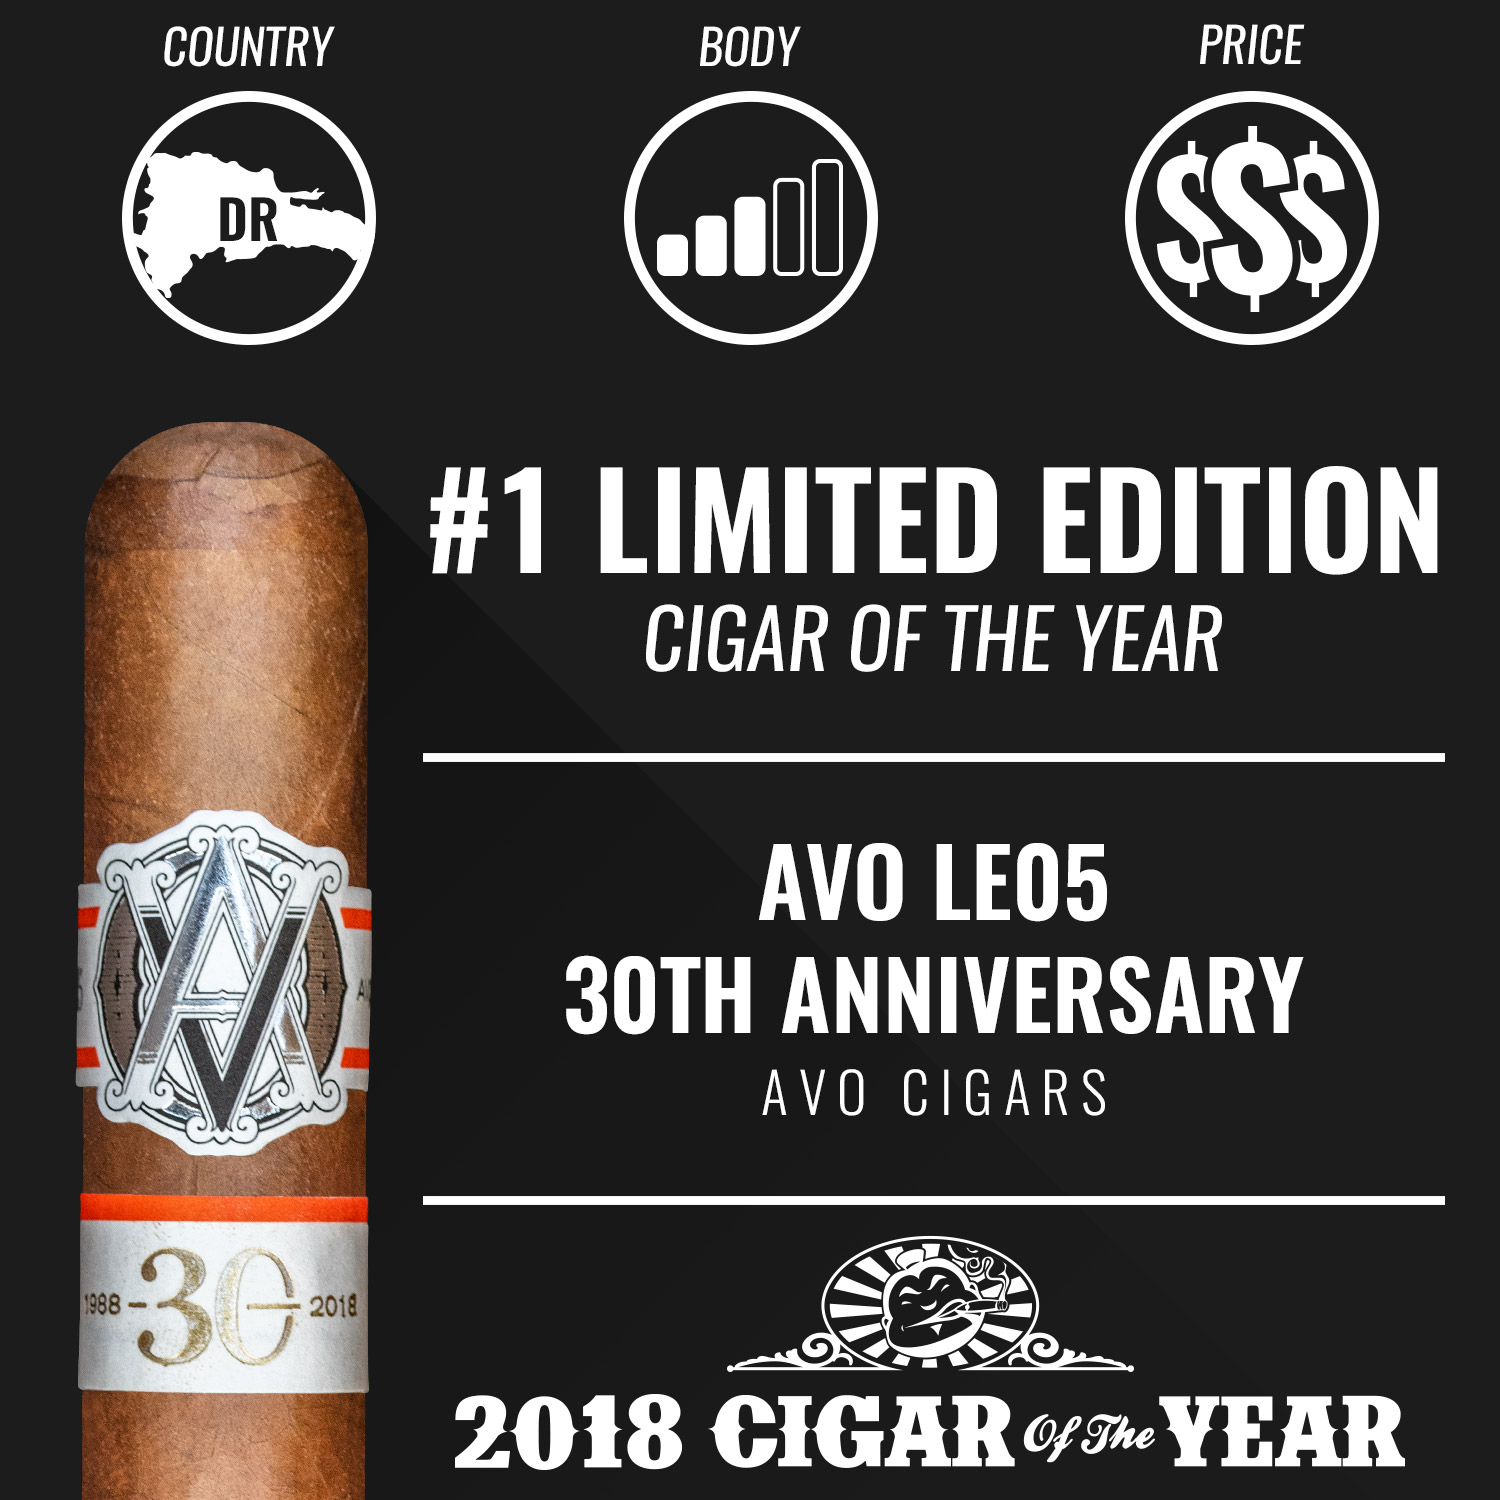 AVO LE05 30th Anniversary No. 1 Limited Edition Cigar of the Year 2018